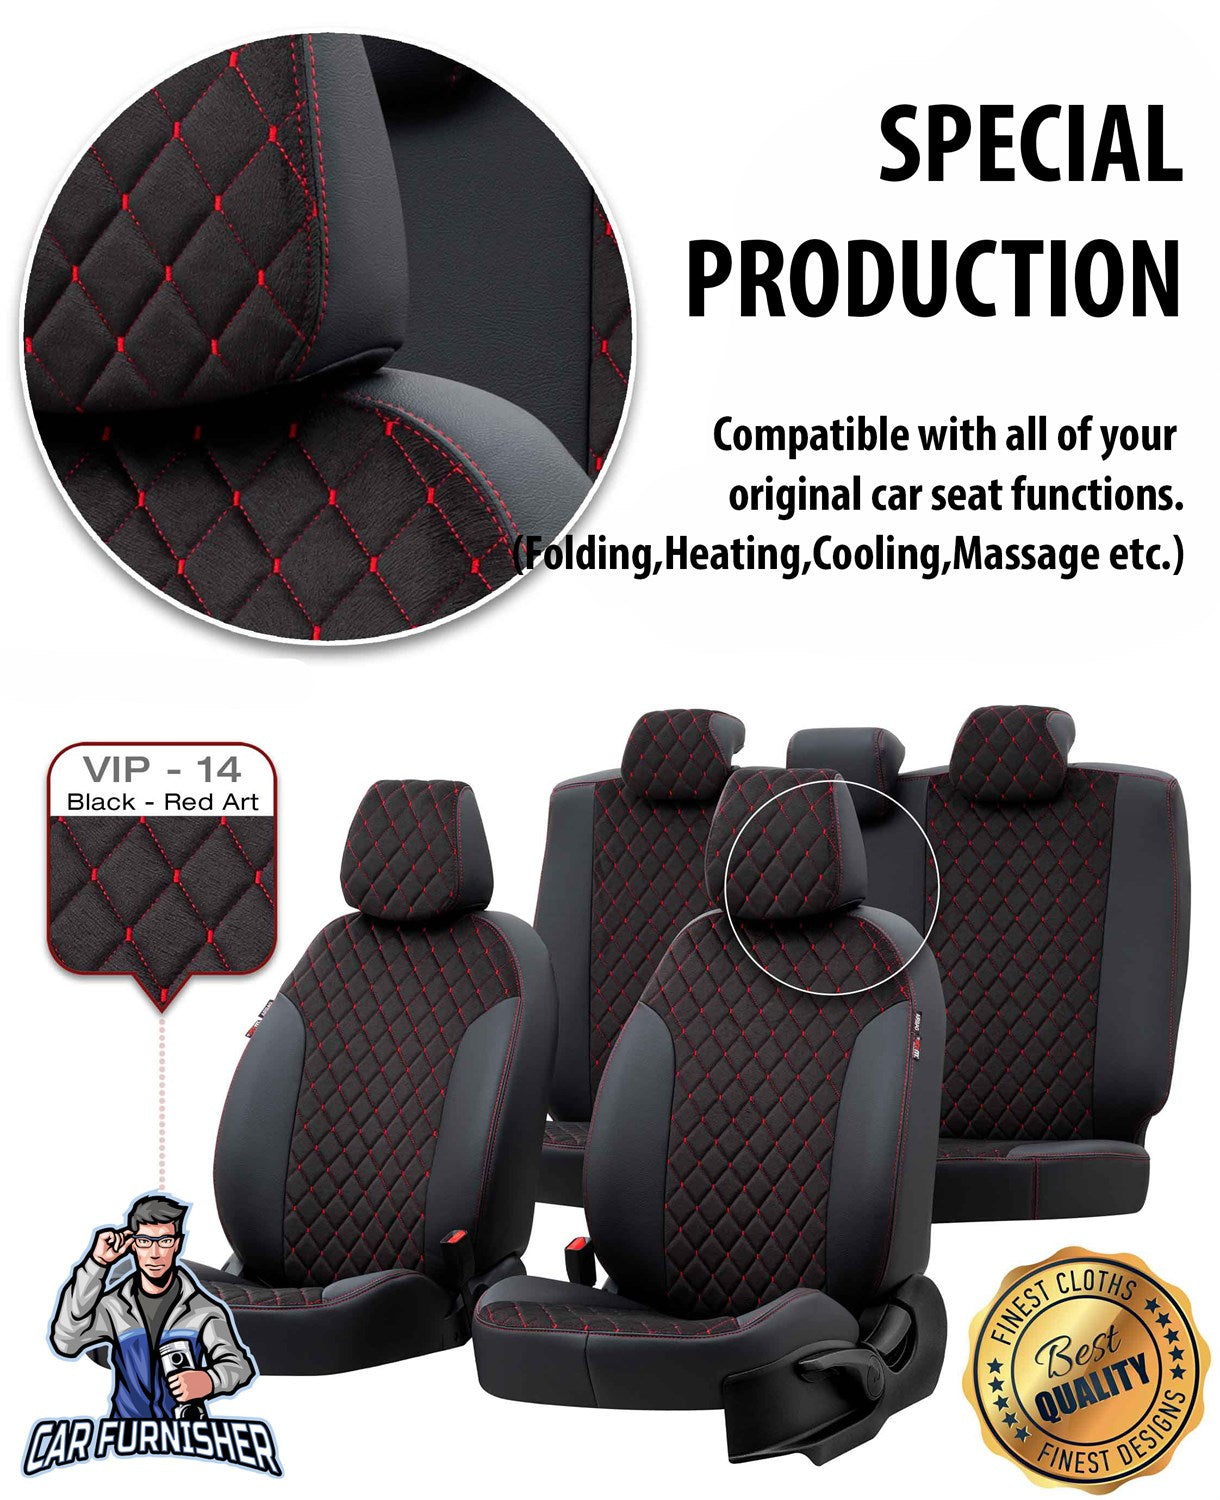 Mercedes C Class Seat Covers Madrid Foal Feather Design Smoked Leather & Foal Feather